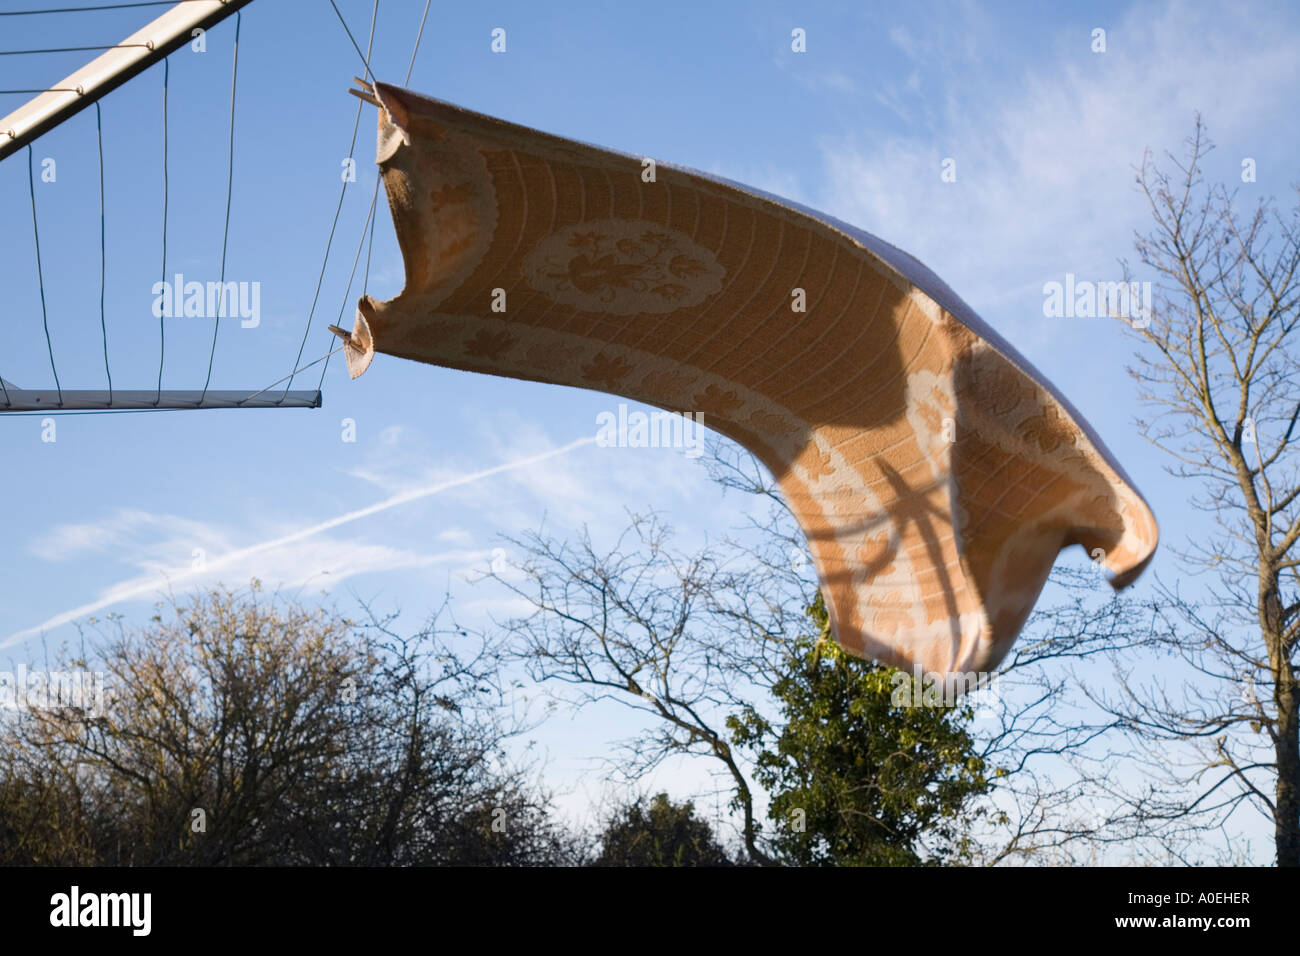 Large towel hanging out to dry with pegs on rotary washing line blown horizontal by strong wind with sun and blue sky Stock Photo